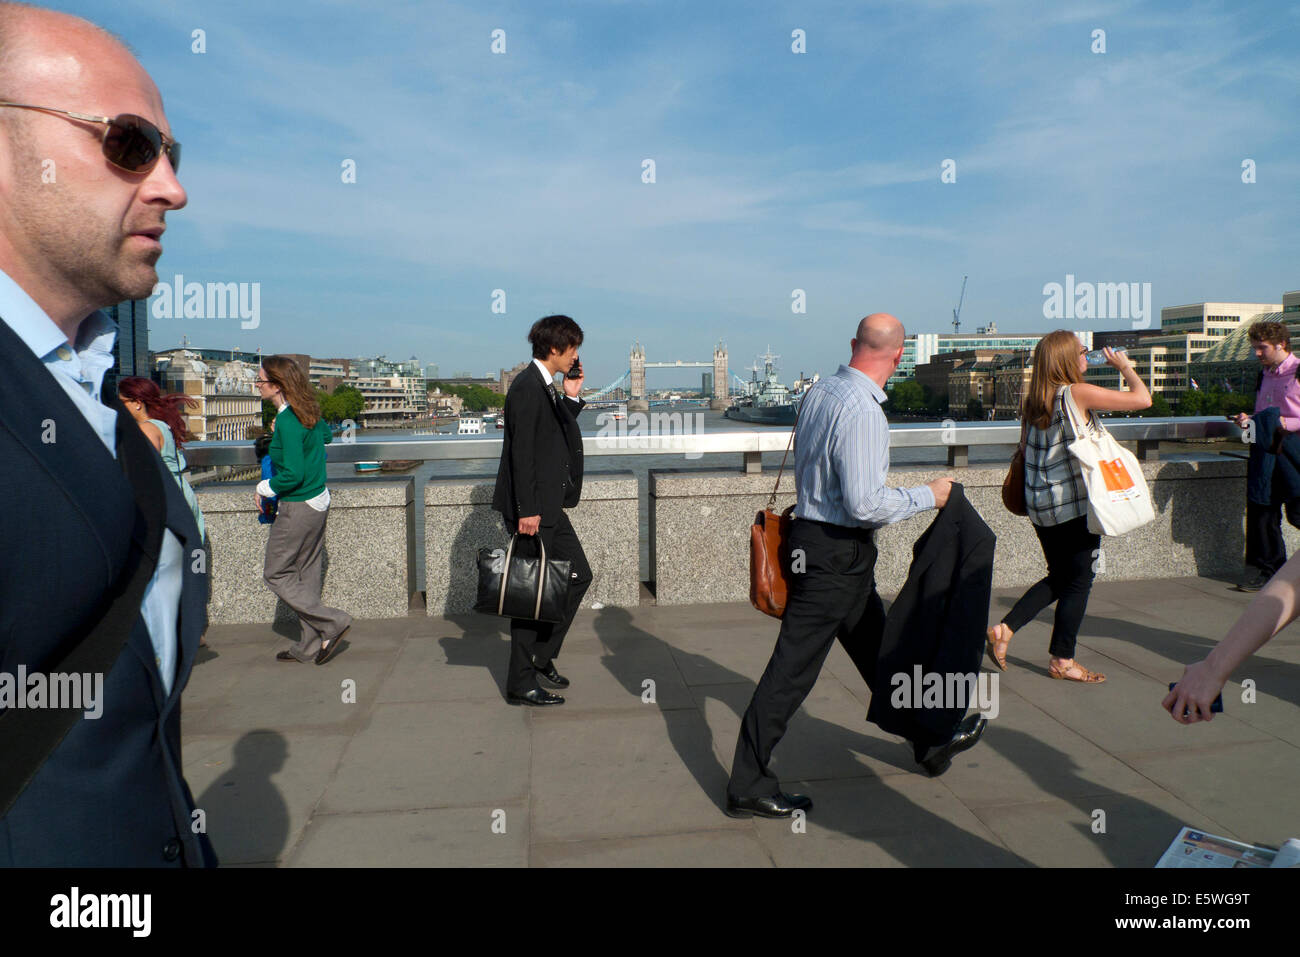 People crossing London Bridge after work in summer with a view of Tower Bridge and River Thames  London UK   KATHY DEWITT Stock Photo